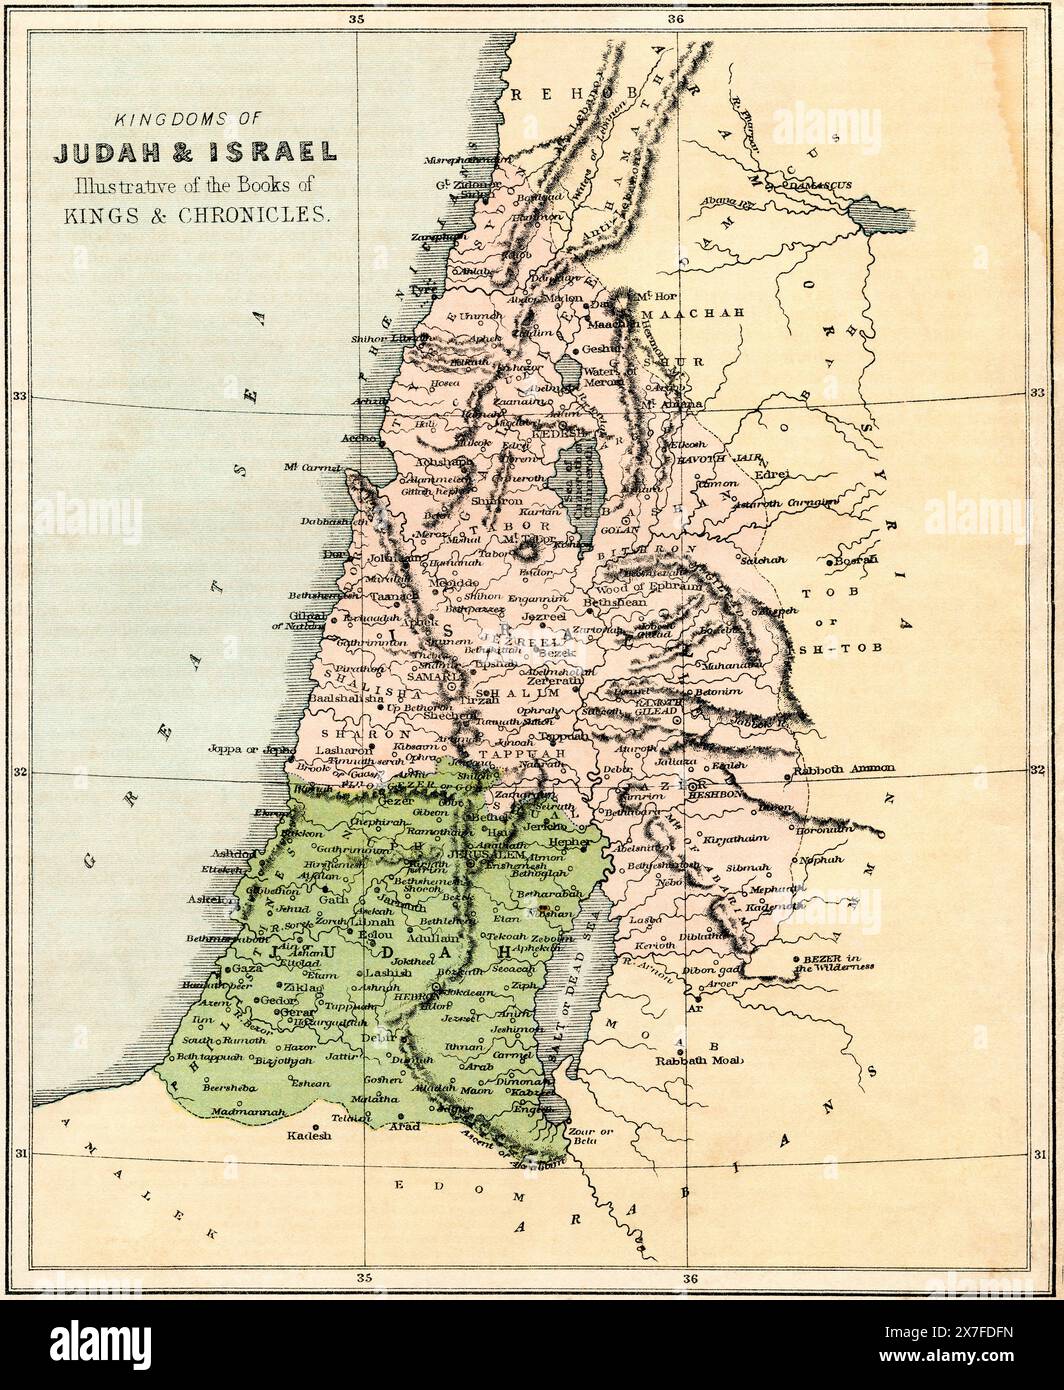 19th century map showing the Kngdoms of Judah and Israel, illustrative of the Books of Kings and Chronicles. Stock Photo